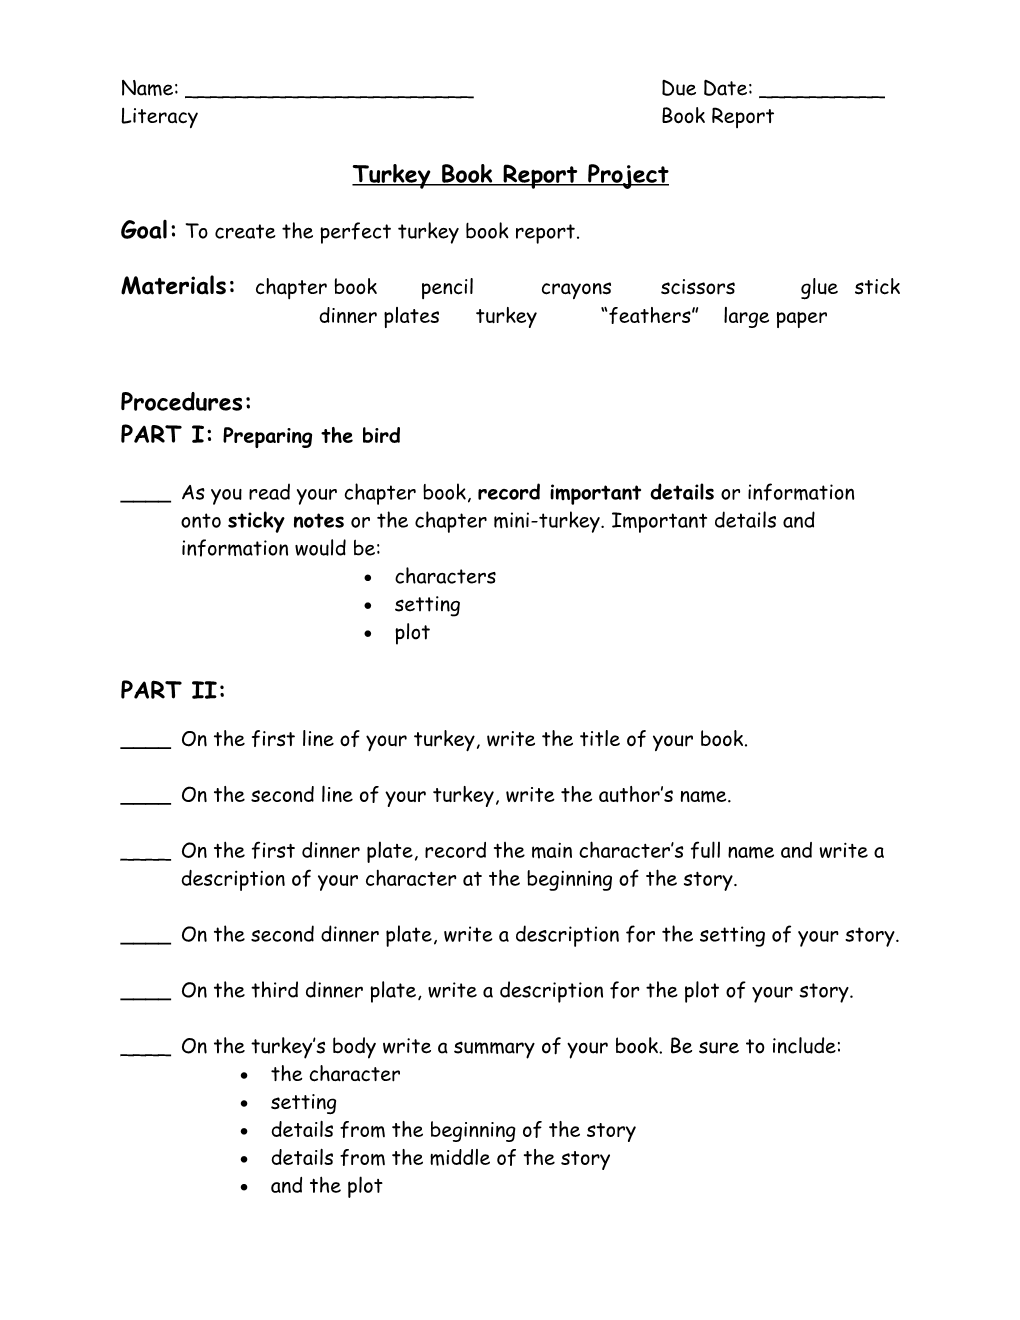 Goal: to Create the Perfect Turkey Book Report